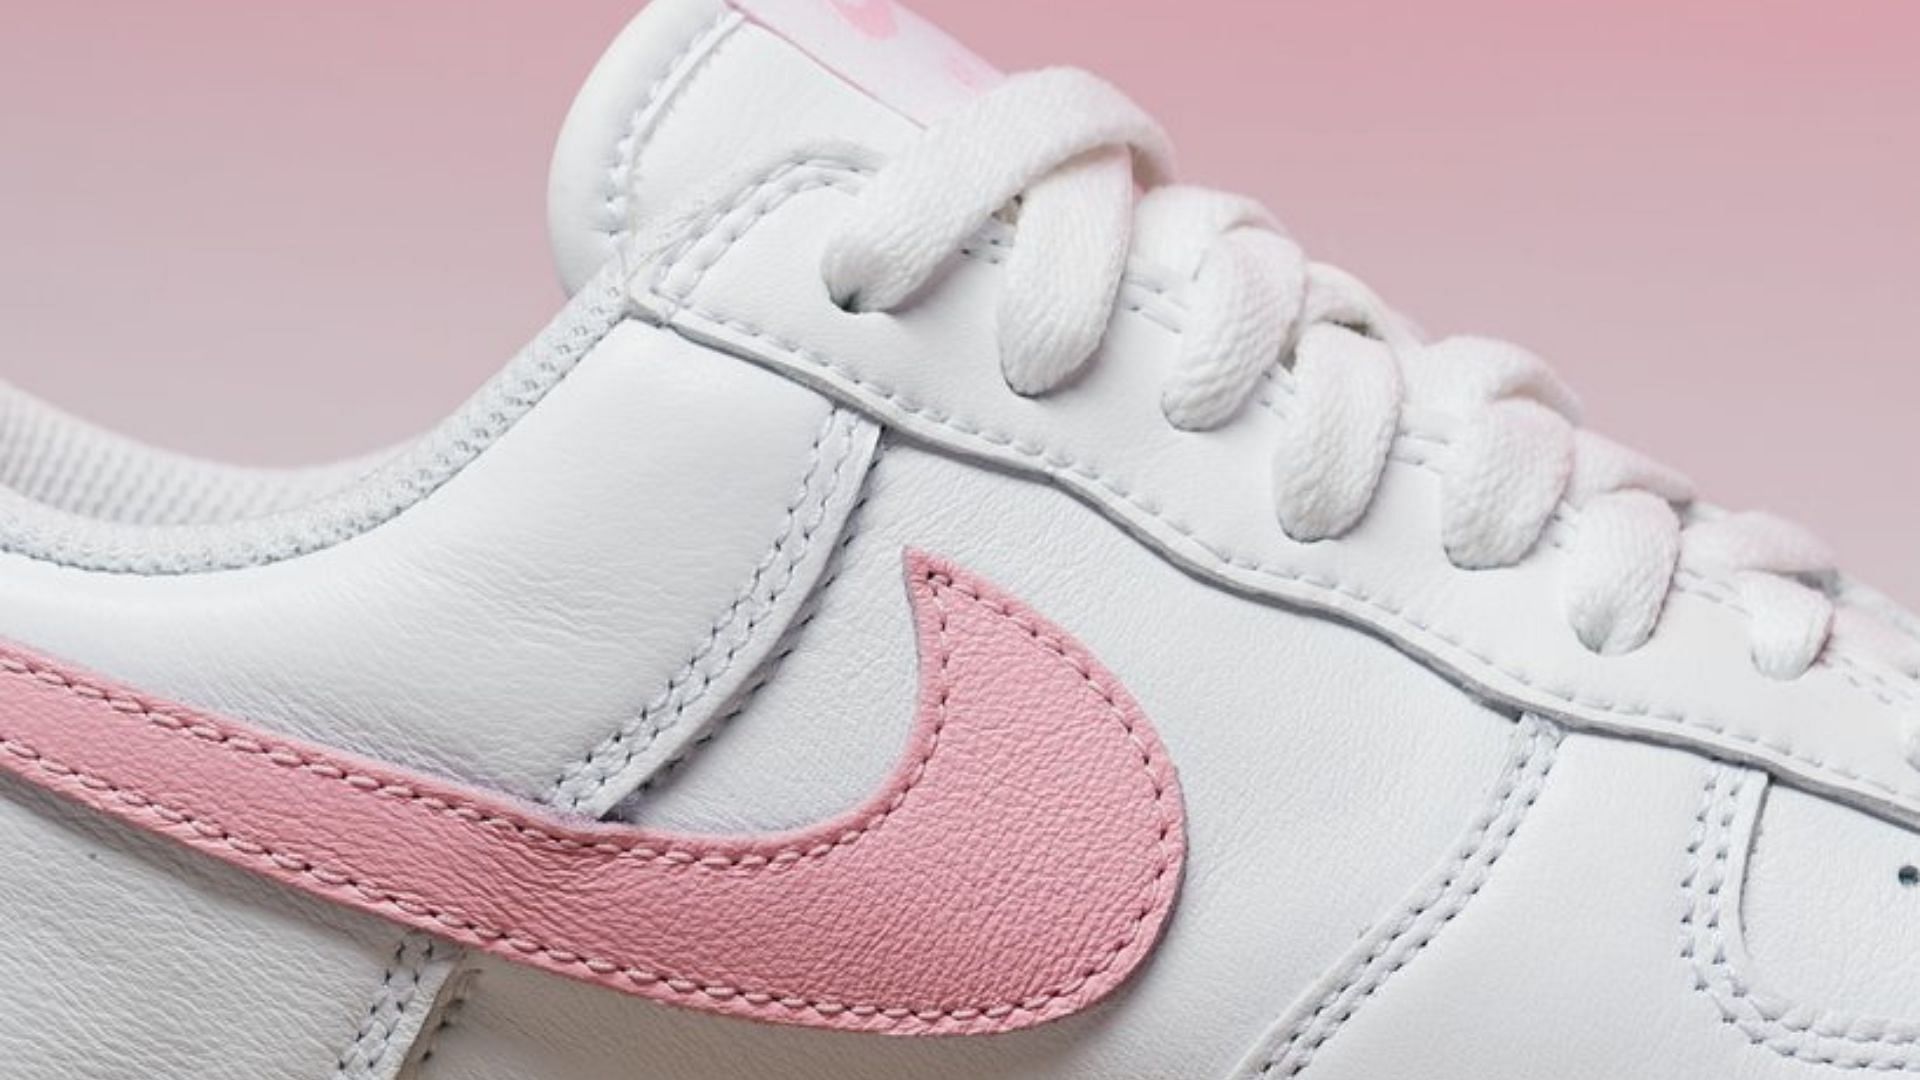 Take a closer look at the pink swoosh of the upcoming Nike Air Force 1 Low sneaker (Image via Twitter/@justfreshkicks)